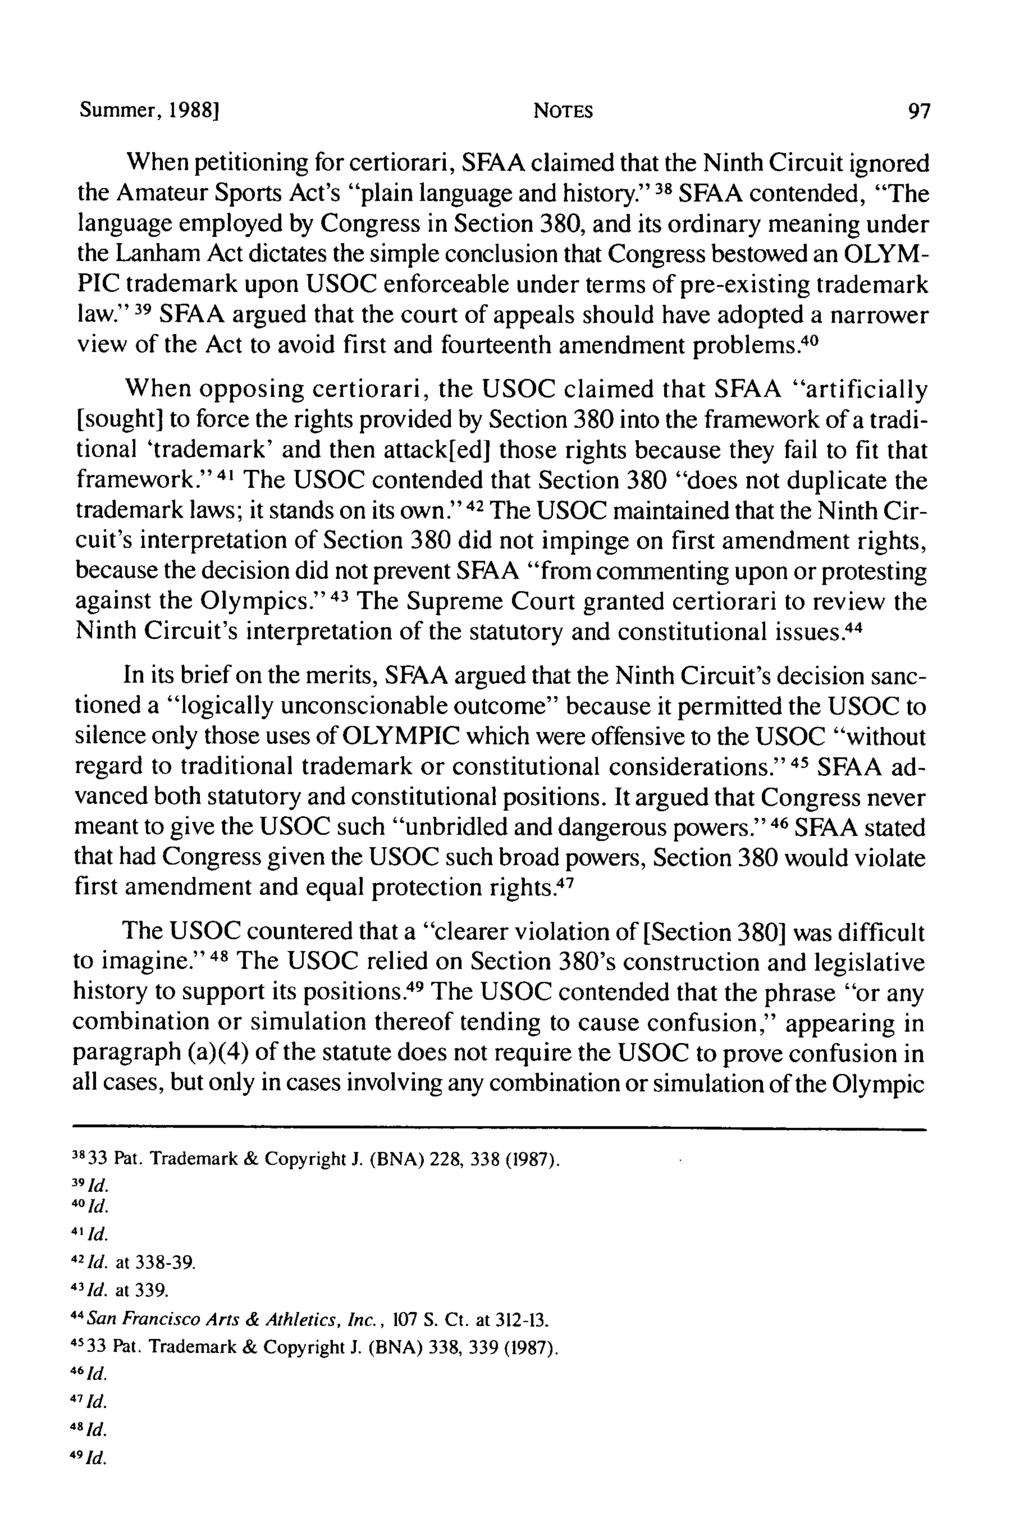 Summer, 1988] NOTES When petitioning for certiorari, SFAA claimed that the Ninth Circuit ignored the Amateur Sports Act's "plain language and history.